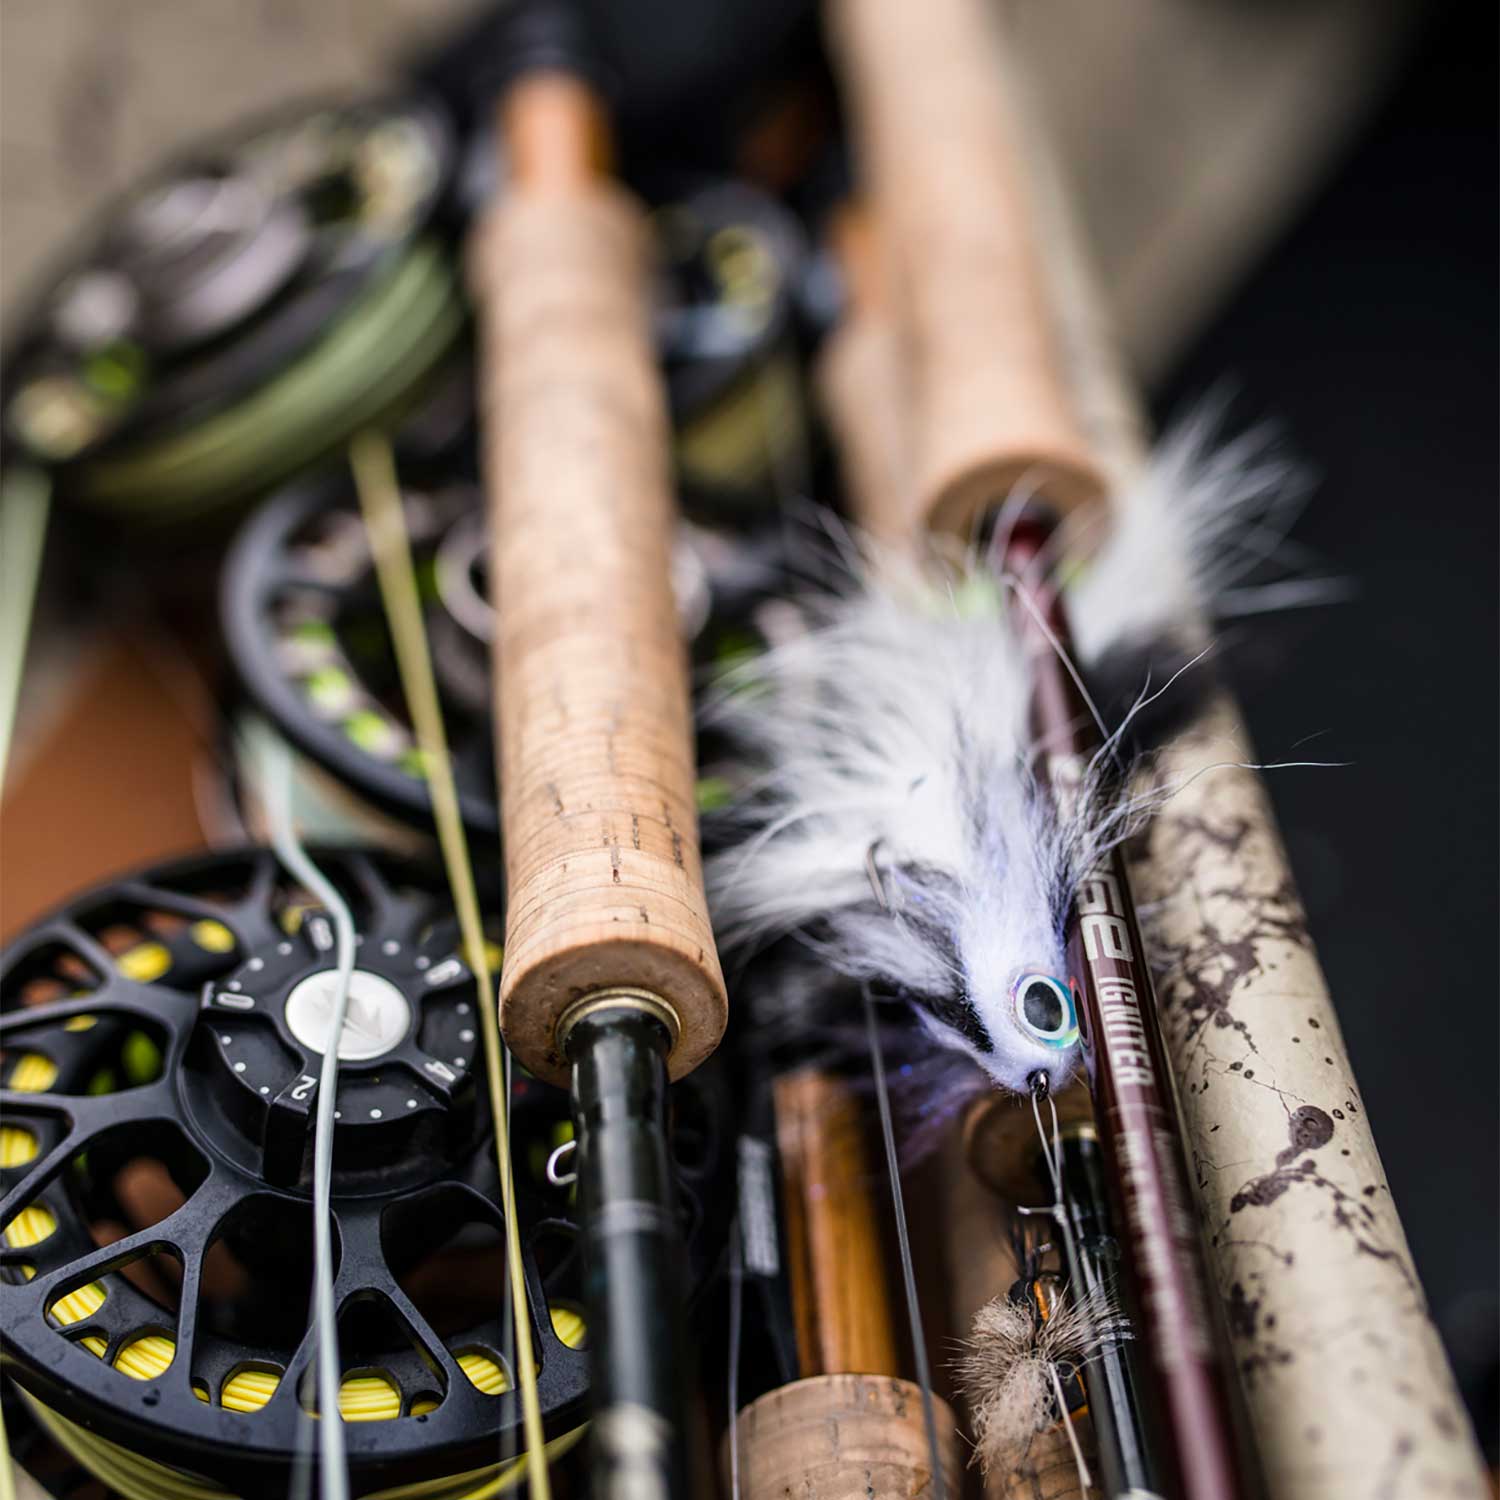 A collection of fly fishing rods and reels.